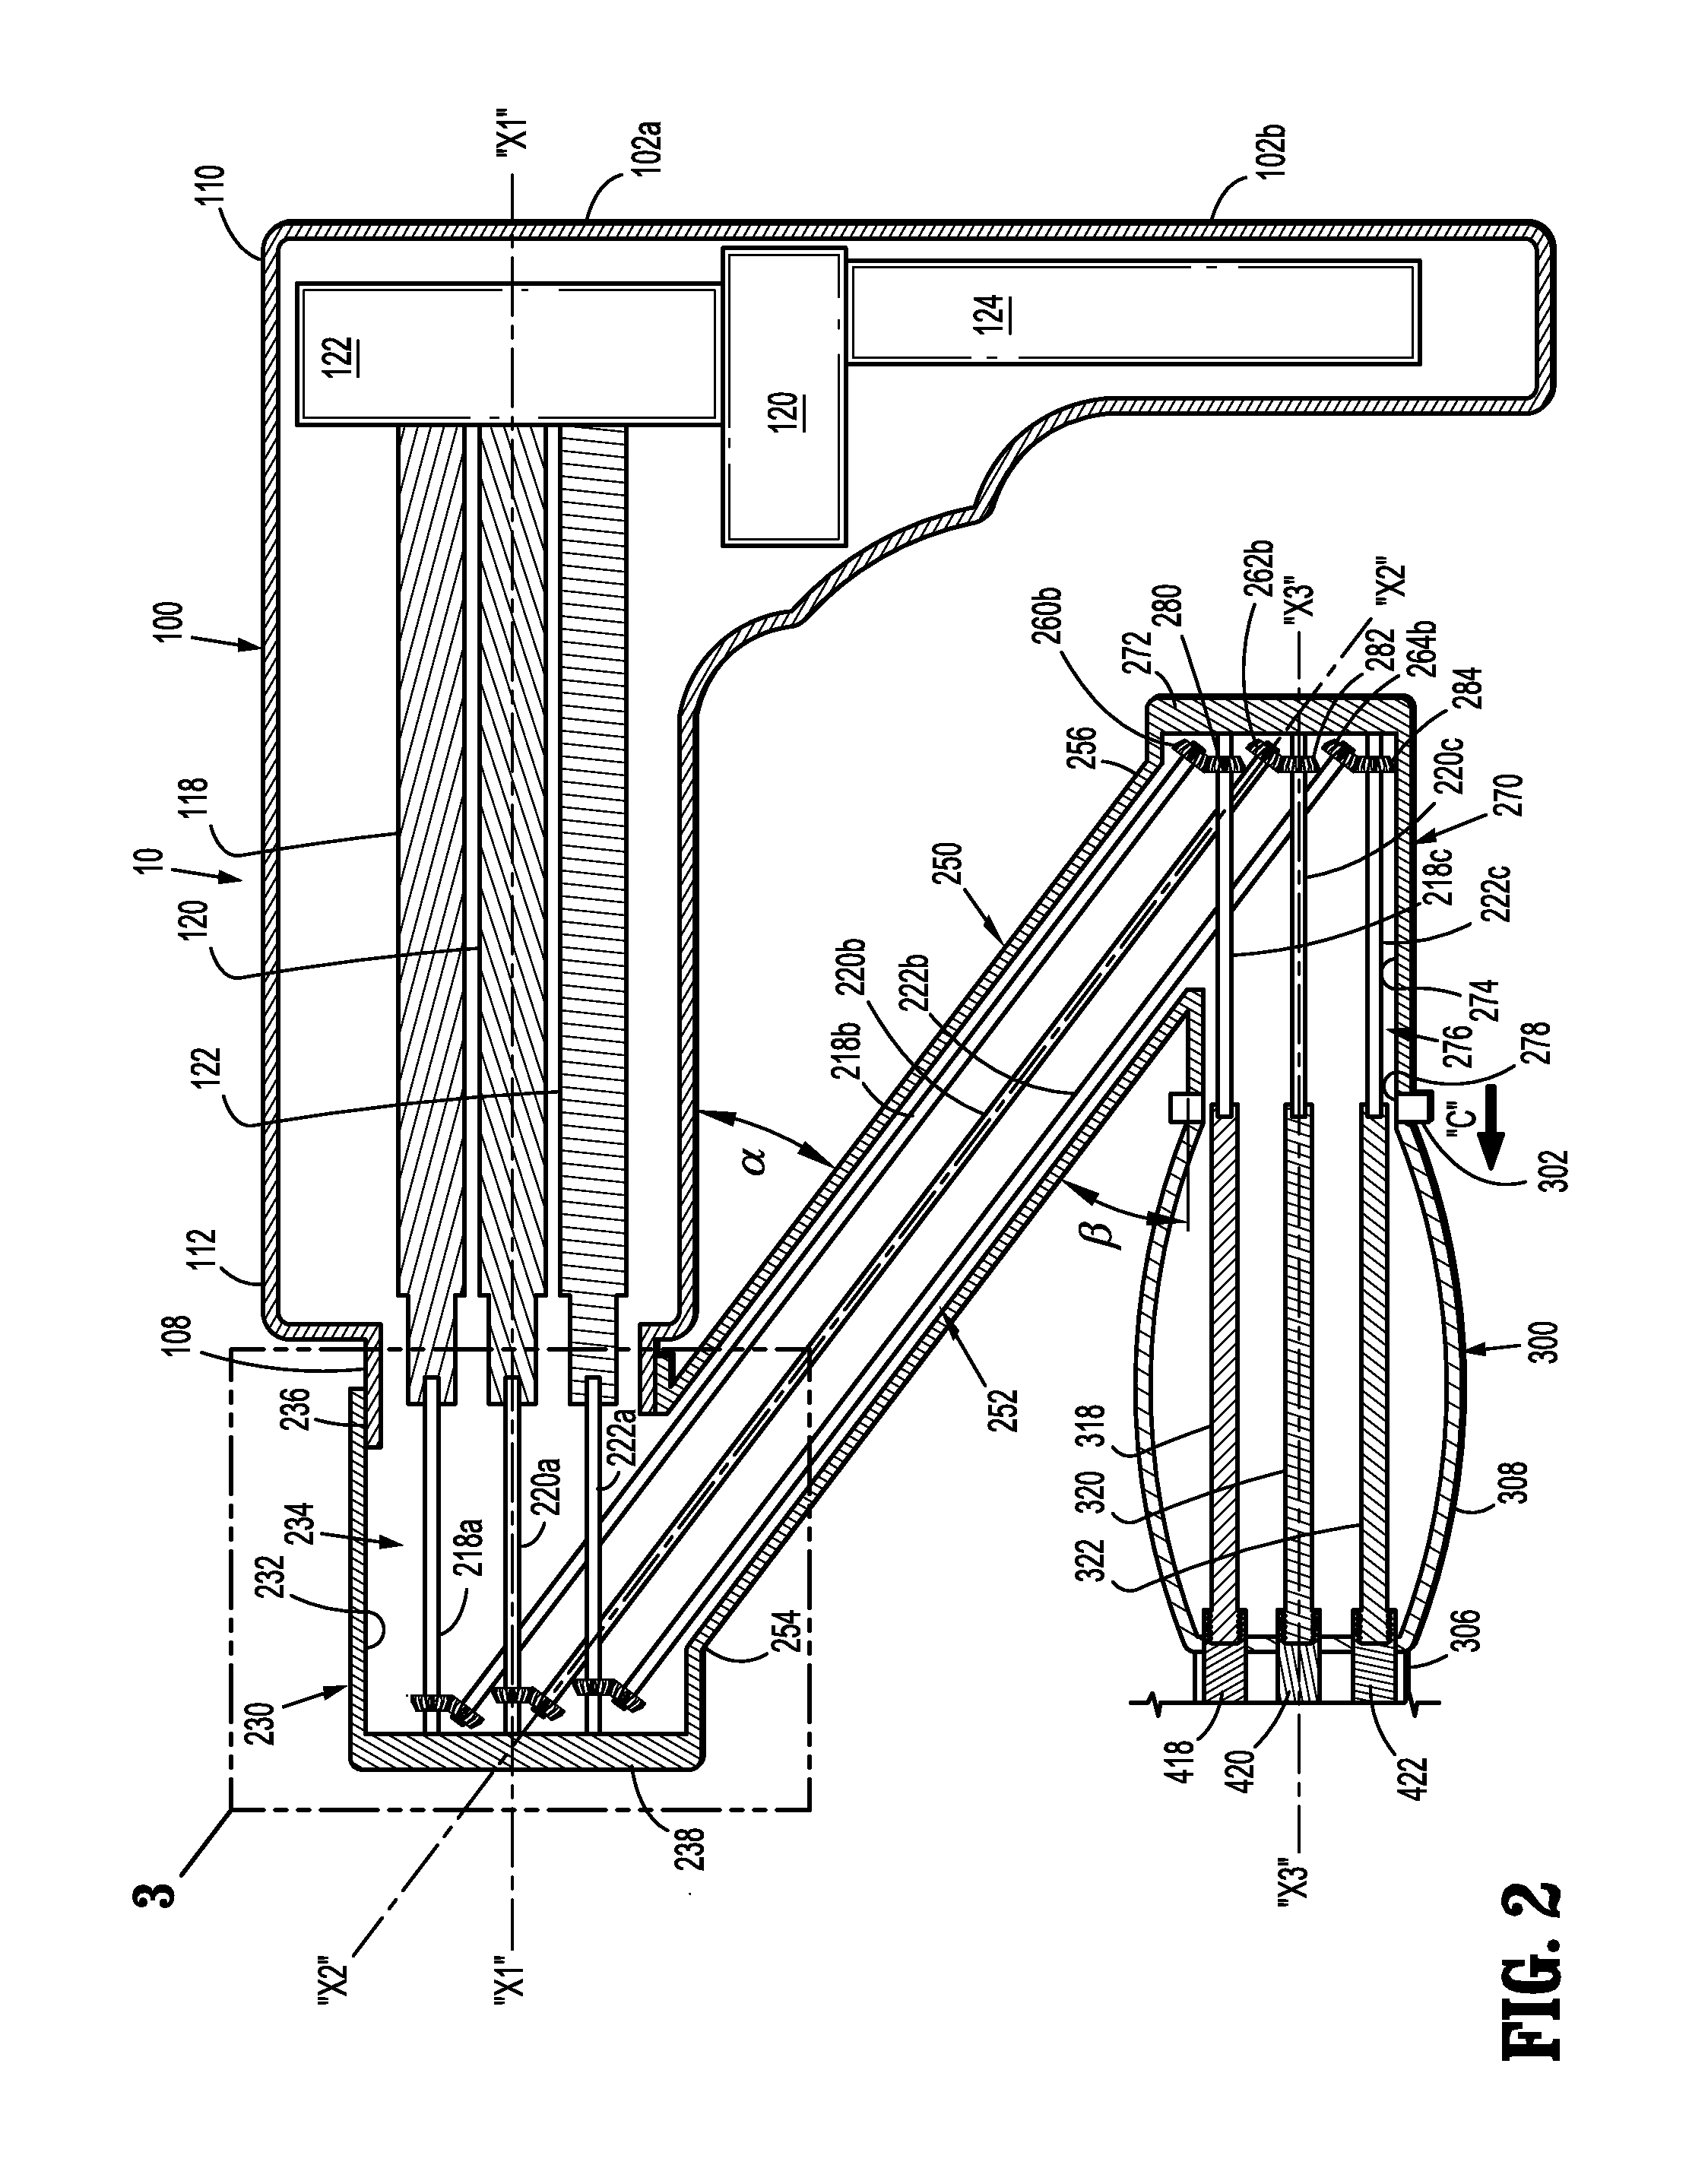 Coupling assembly for interconnecting an adapter assembly and a surgical device, and surgical systems thereof